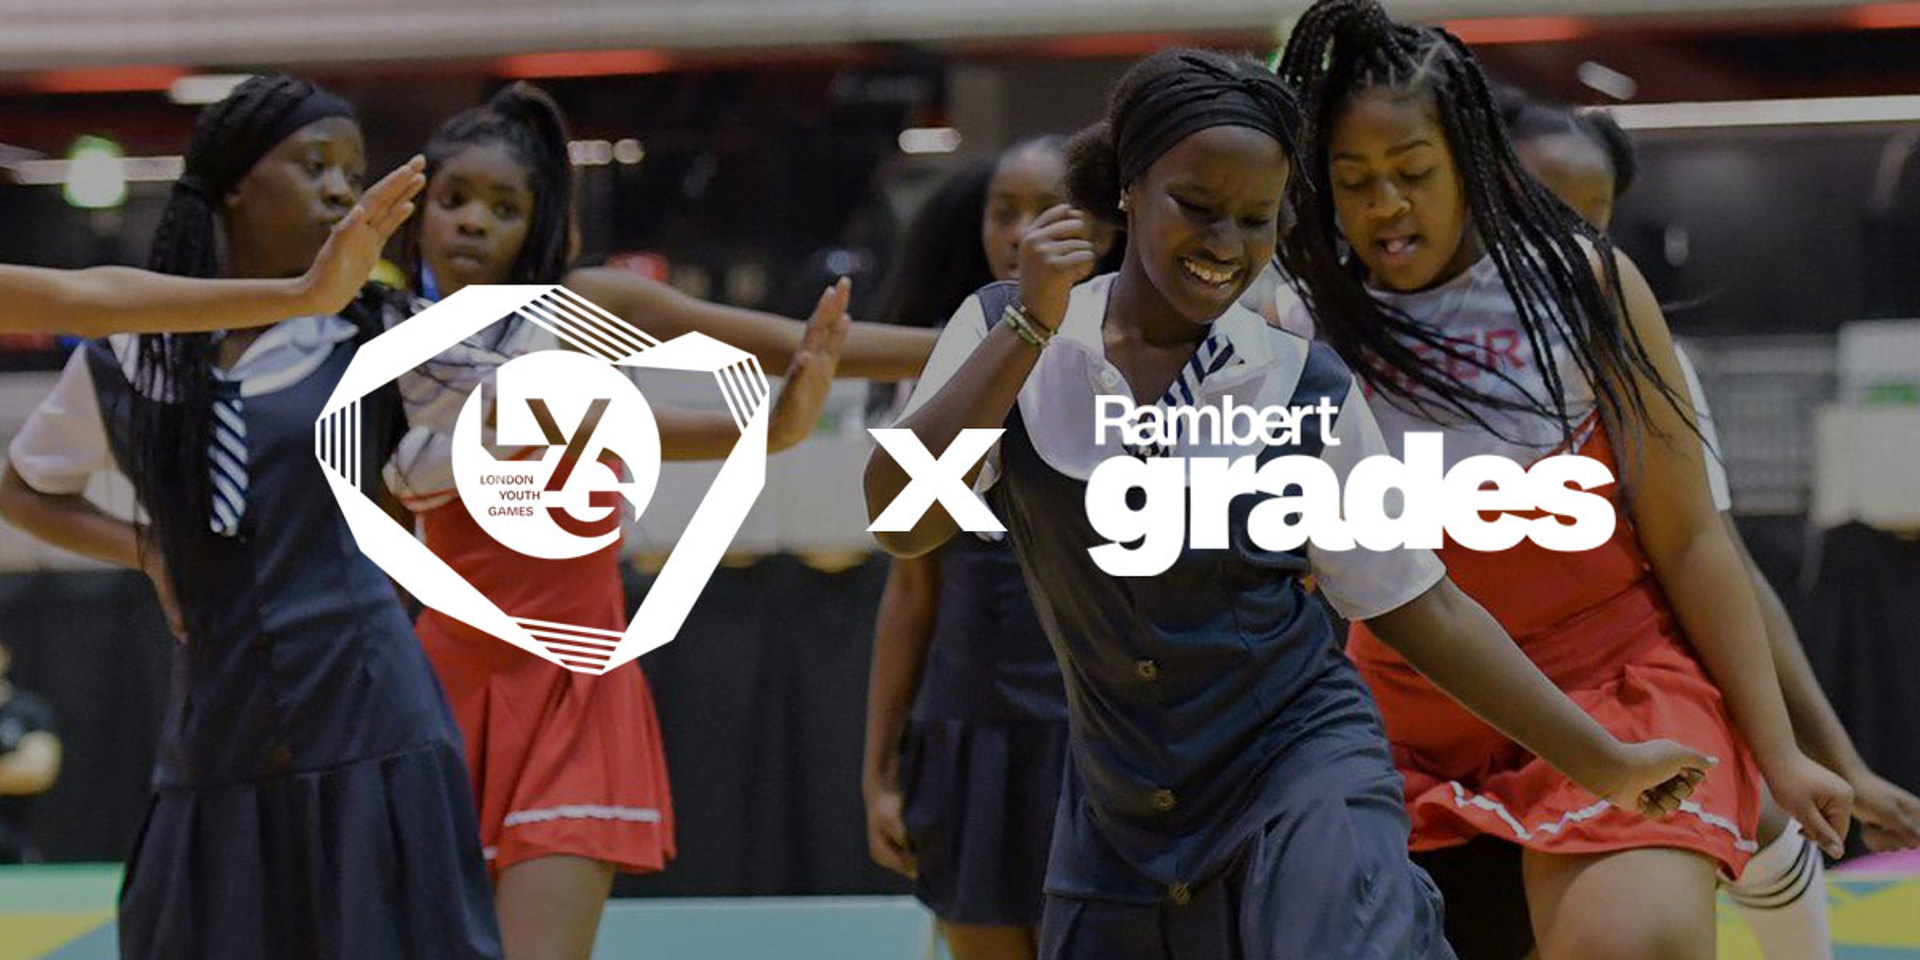 Image of young global majority dancers dancing behind a logo that says london youth games x rambert grades